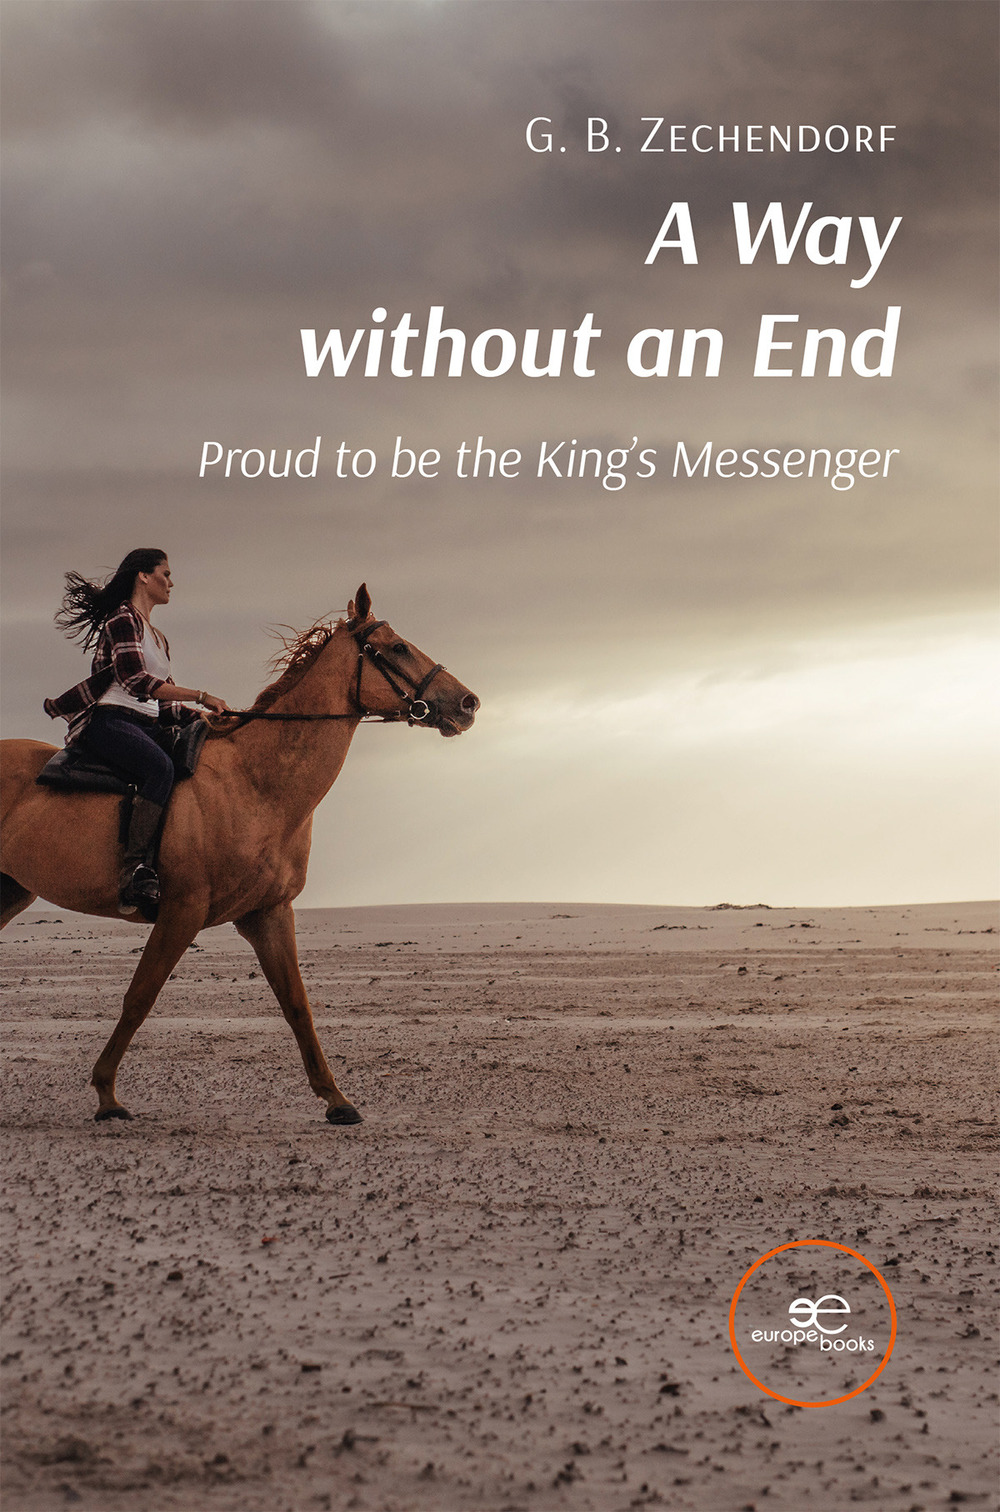 A way without an end. Proud to be the King's Messenger